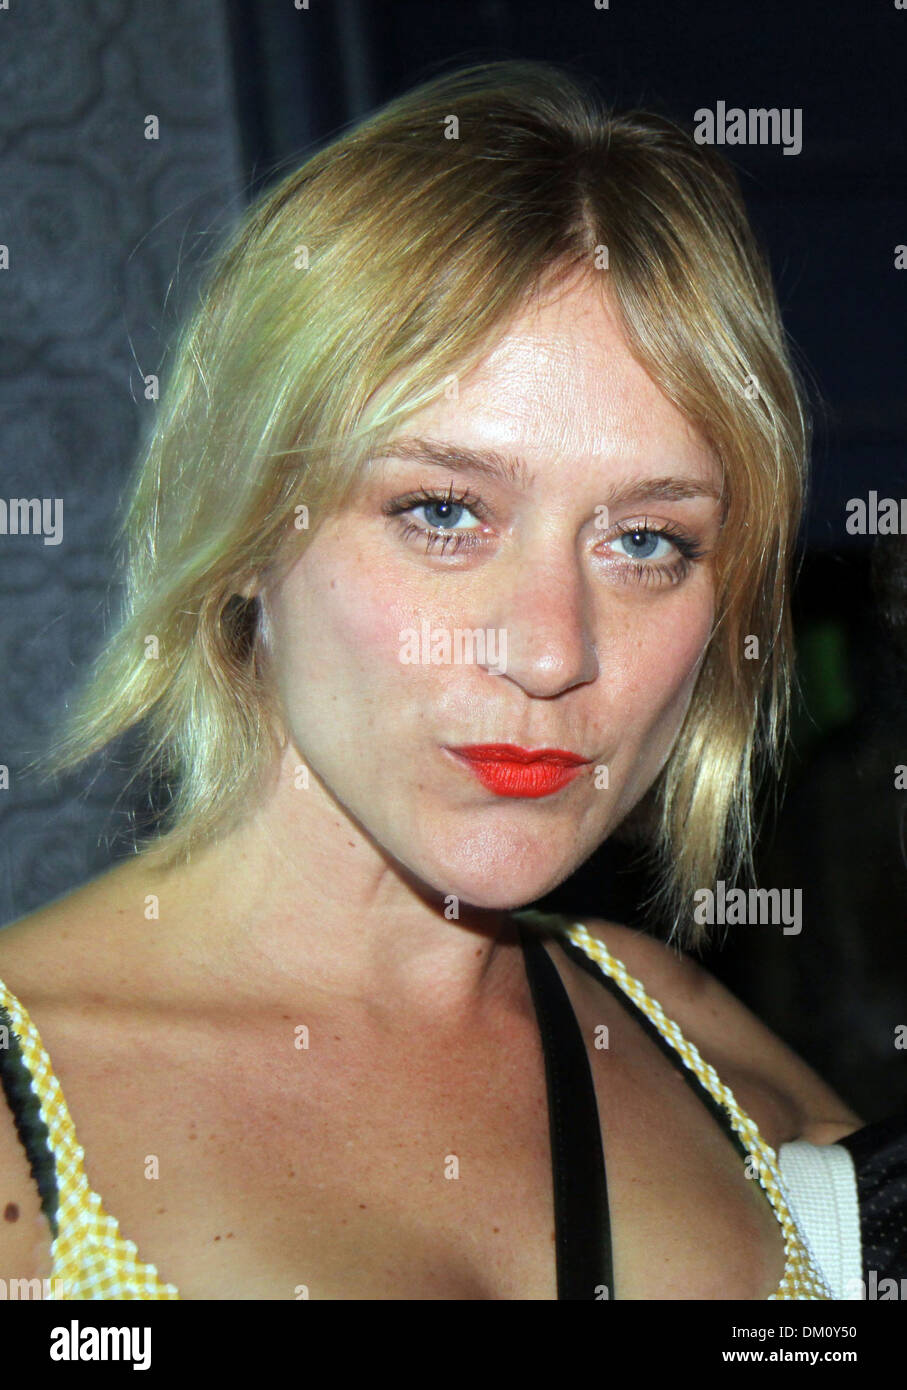 Chloe Sevigny attending Opening Ceremony 10 Year Anniversary Party at Webster Hall Featuring: Chloe Sevigny Where: New York Stock Photo